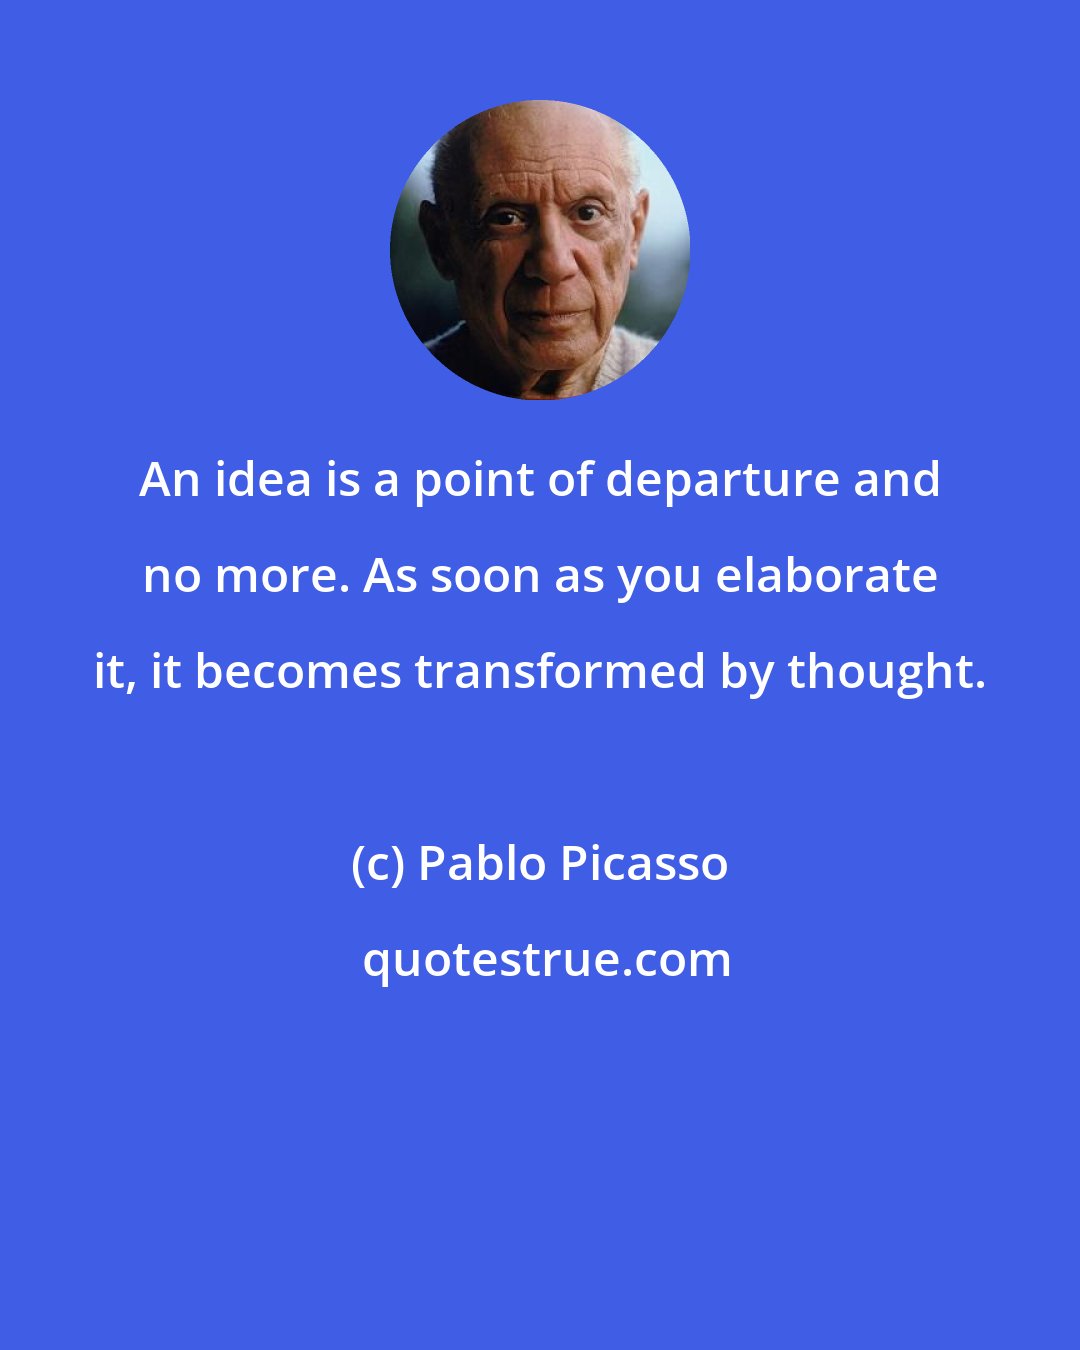 Pablo Picasso: An idea is a point of departure and no more. As soon as you elaborate it, it becomes transformed by thought.